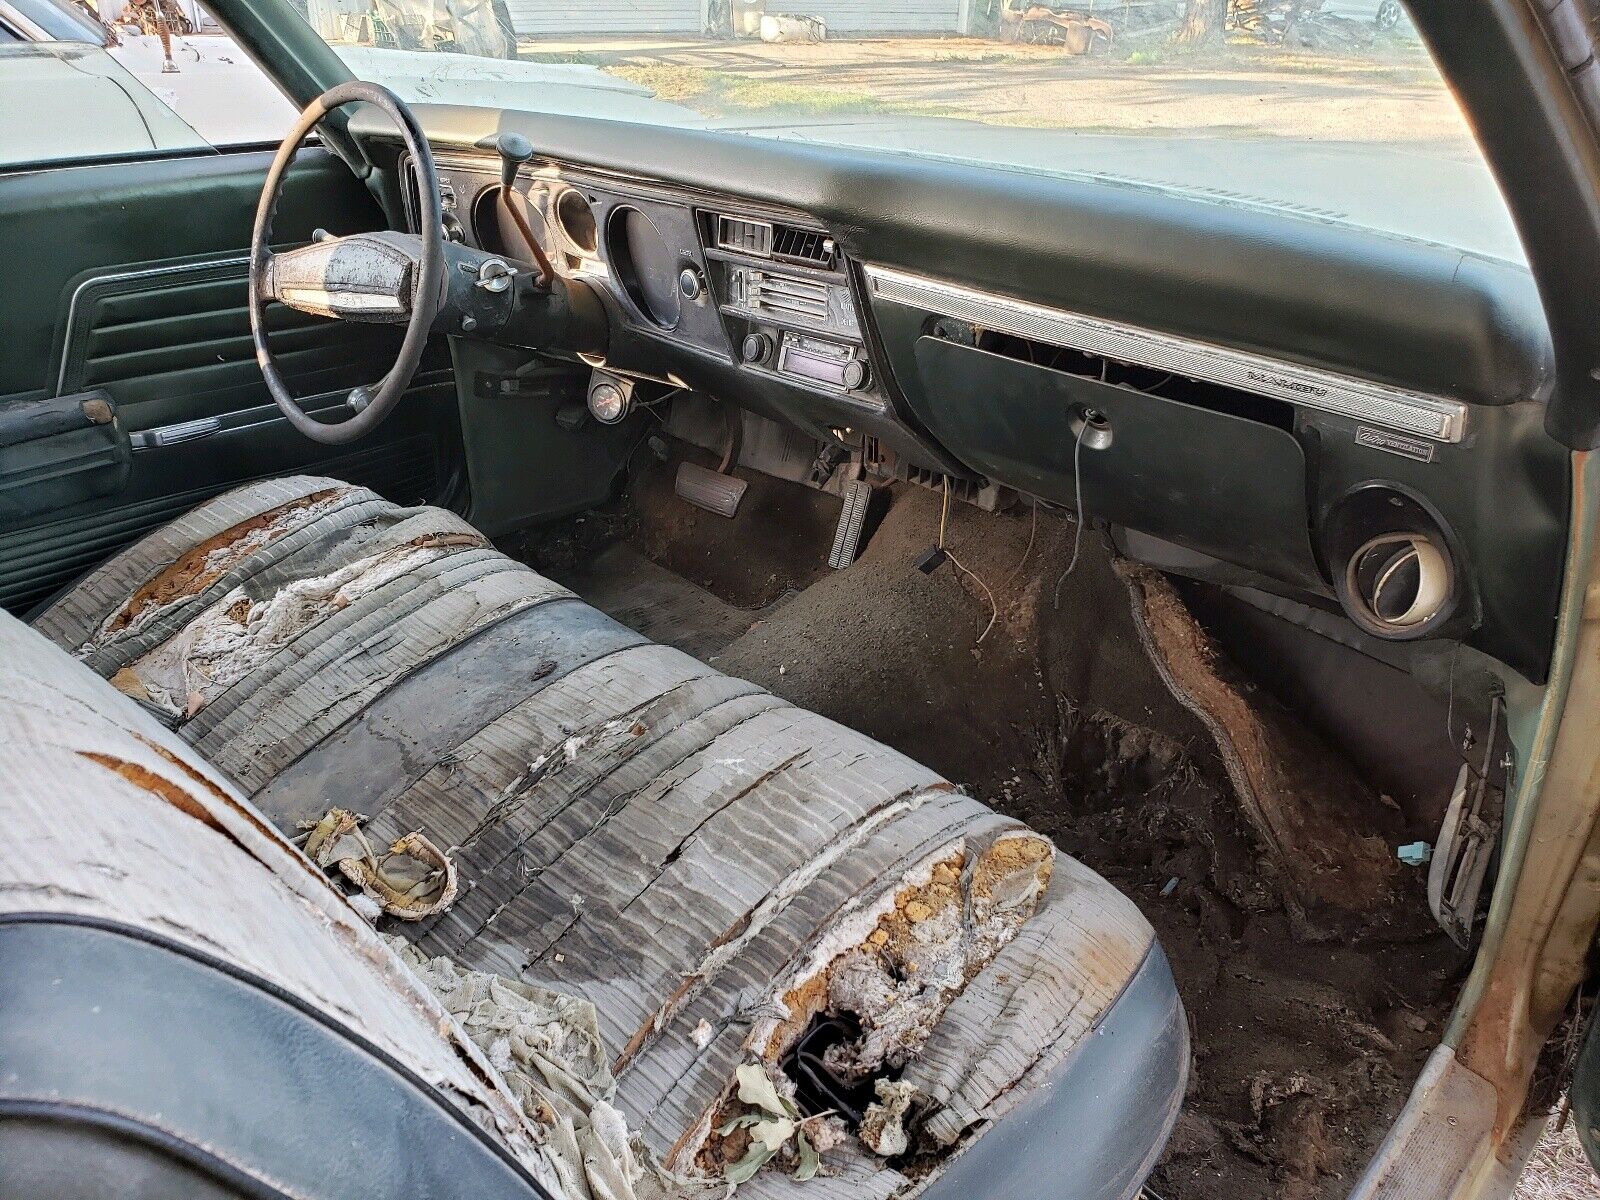 Parked 38 Years Ago: 1969 Chevelle Proves Detroit Metal Loves Texas Weather...